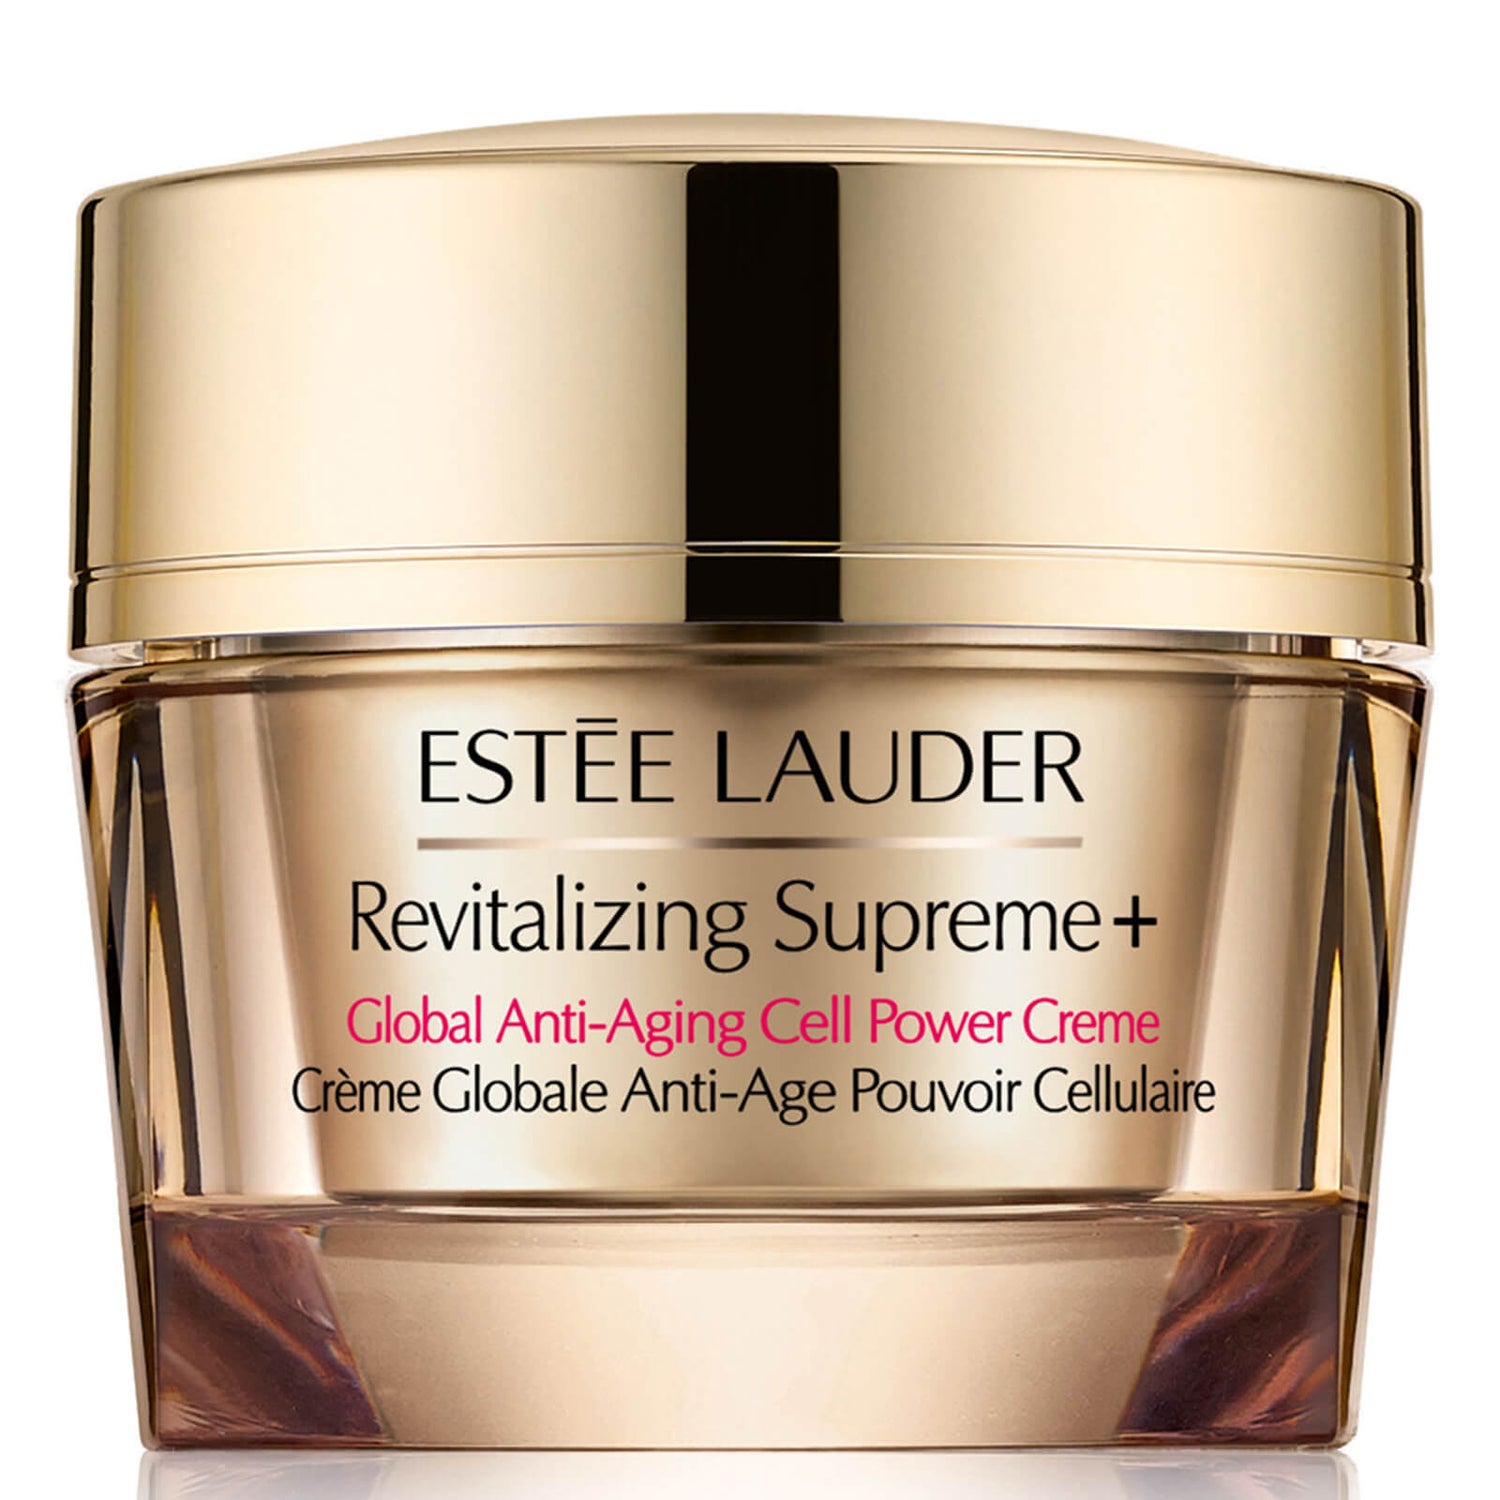 Revitalizing Supreme + Global Anti-Aging Cell Power Creme | Estee Lauder Hungary E-commerce Site